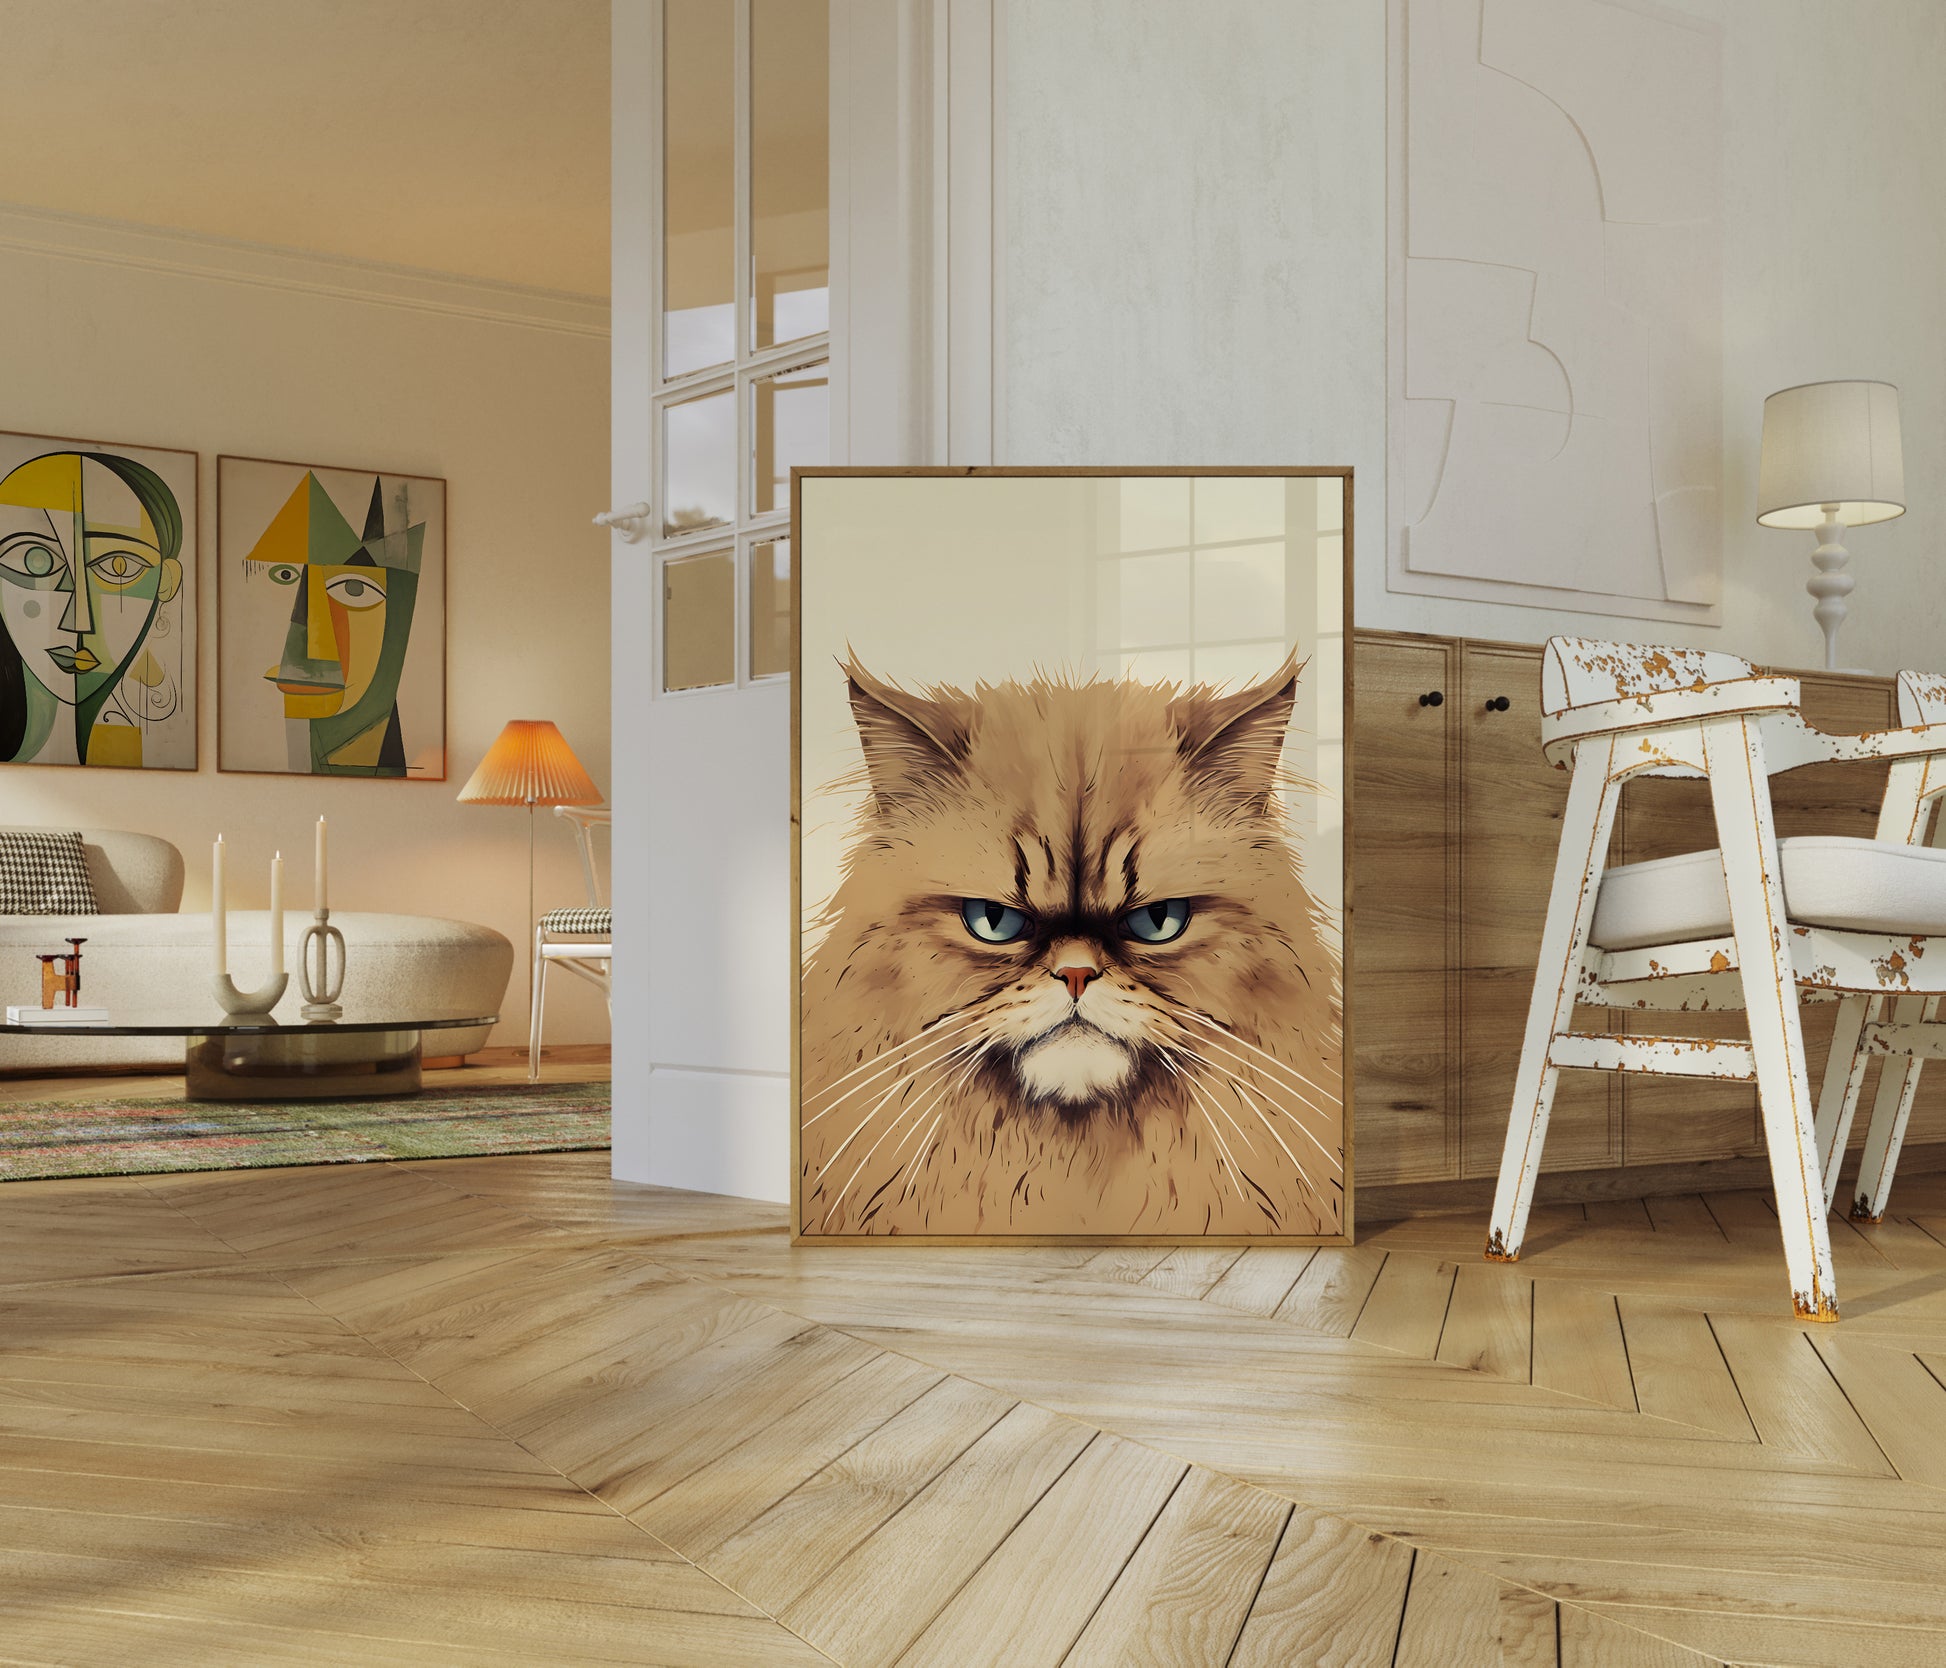 Artwork of a grumpy cat on a canvas in a stylish living room.